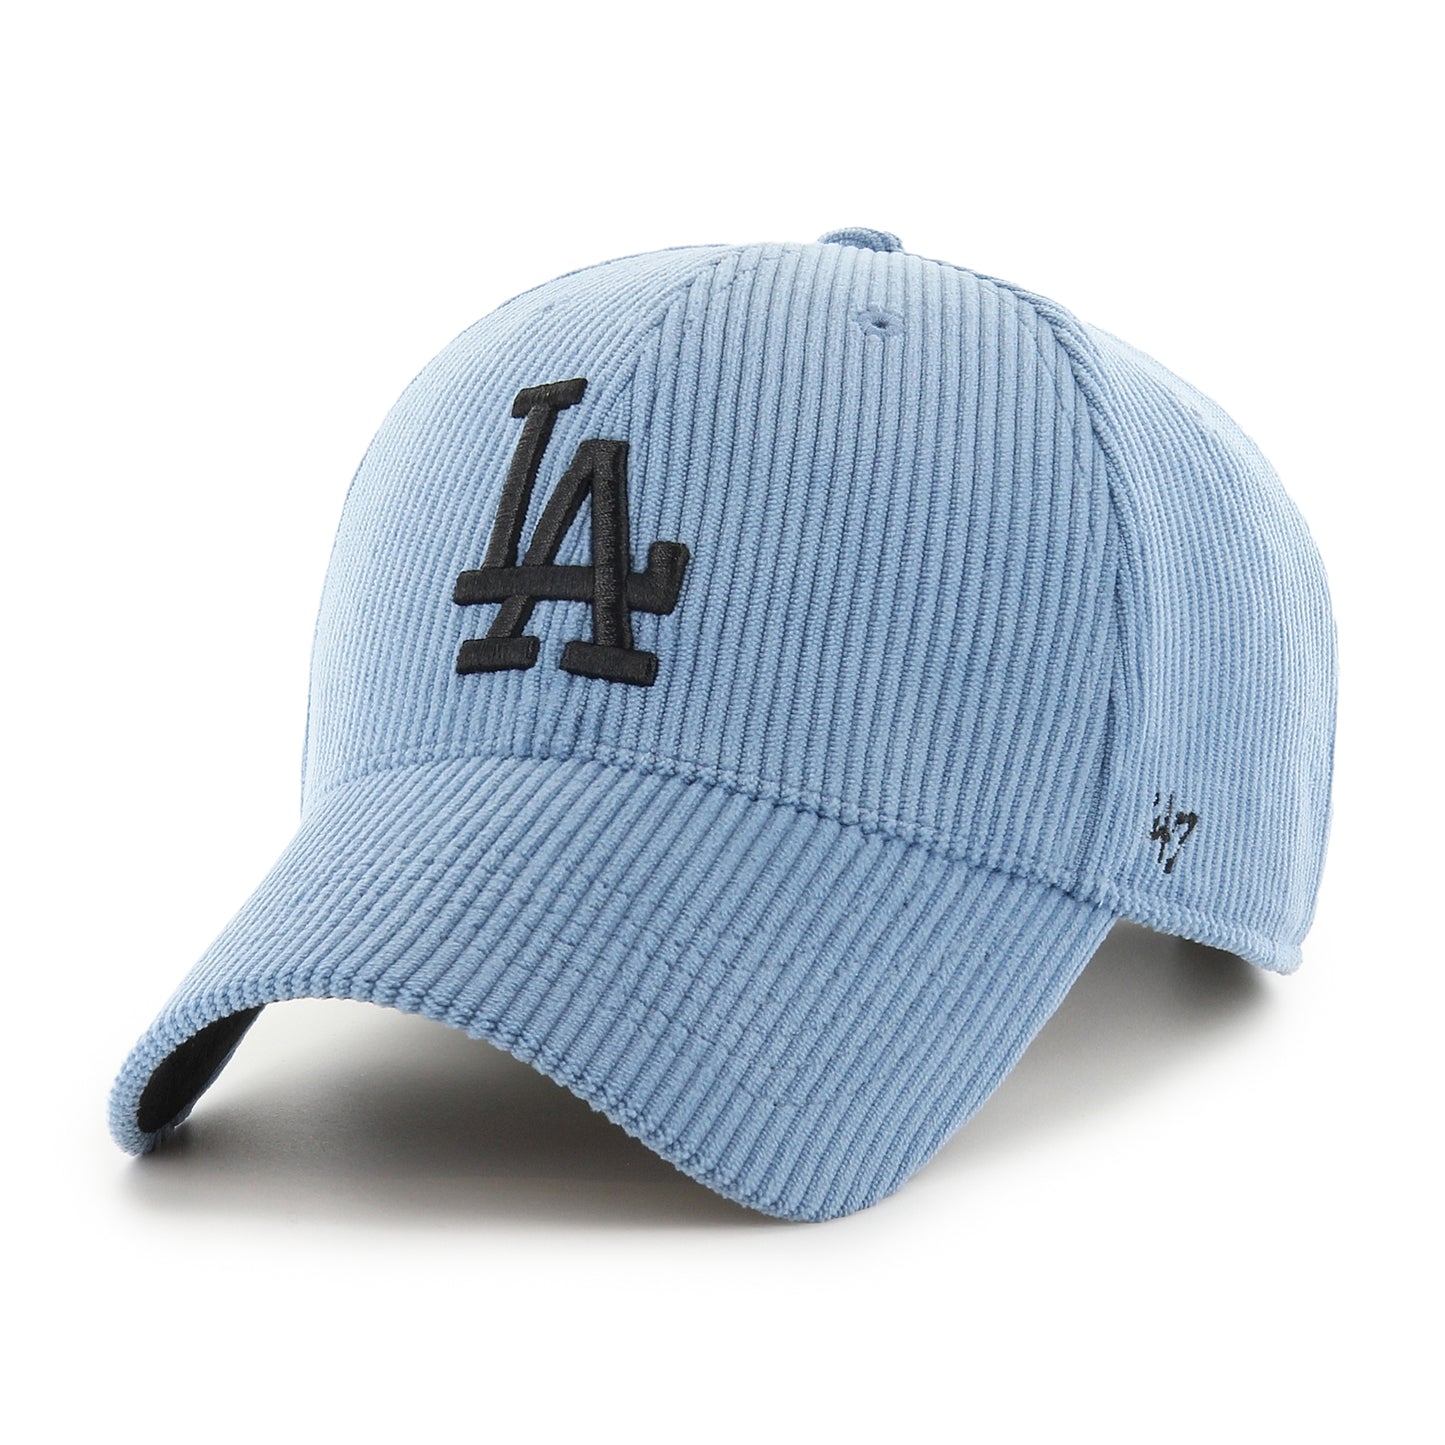 MLB LOS ANGELES DODGERS THICK CORD 47 MVP MONTEGO